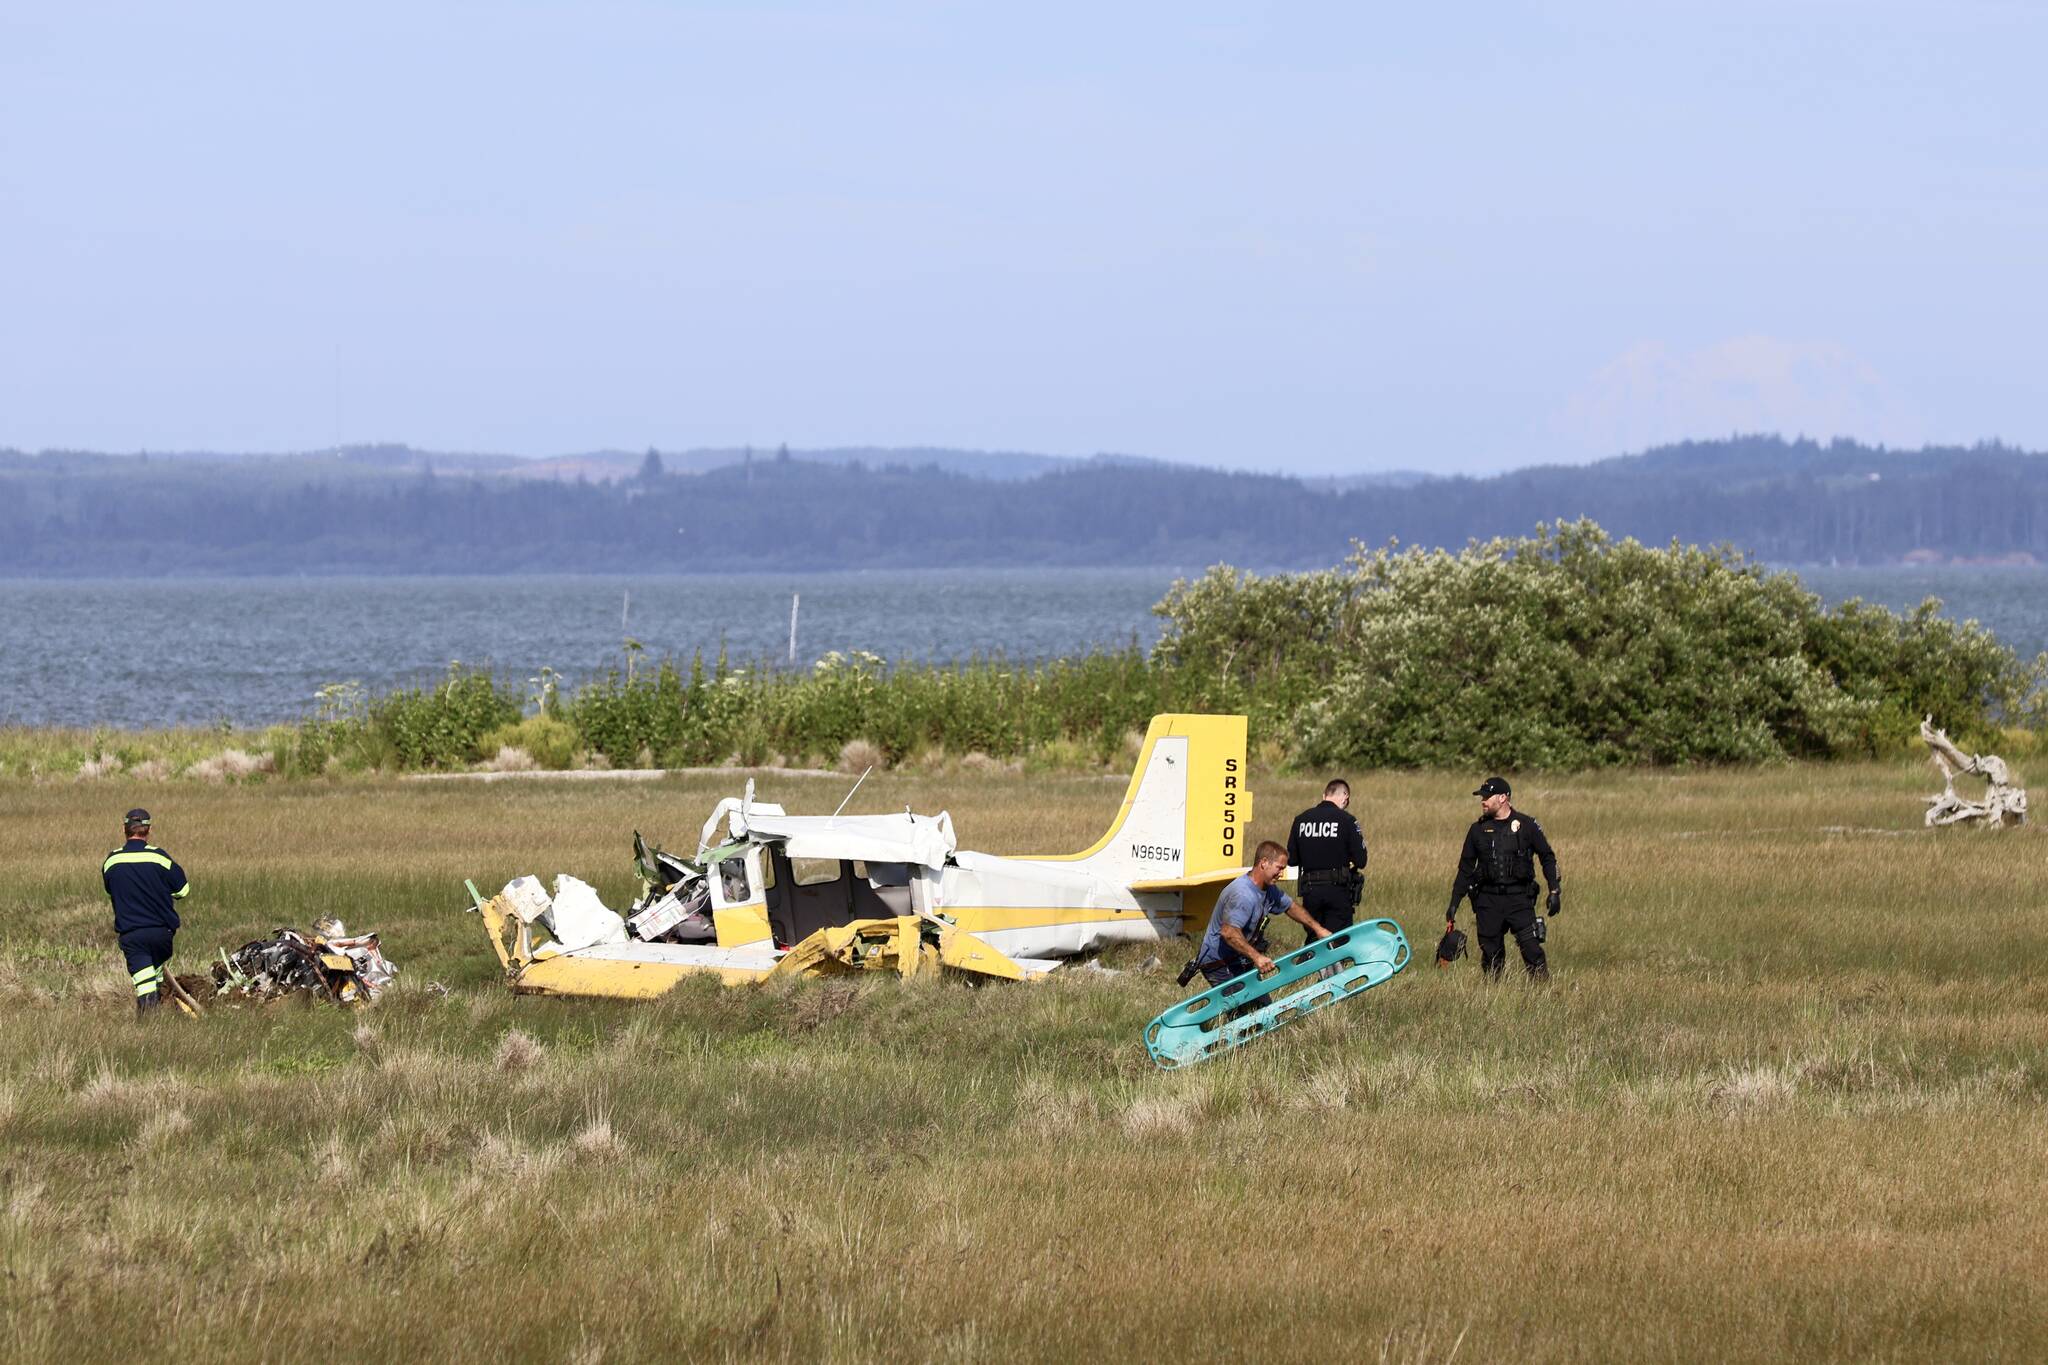 A plane crashed at Ocean Shores Municipal Airport on Saturday, June 8, from an unknown cause, injuring two. (Michael S. Lockett / The Daily World)